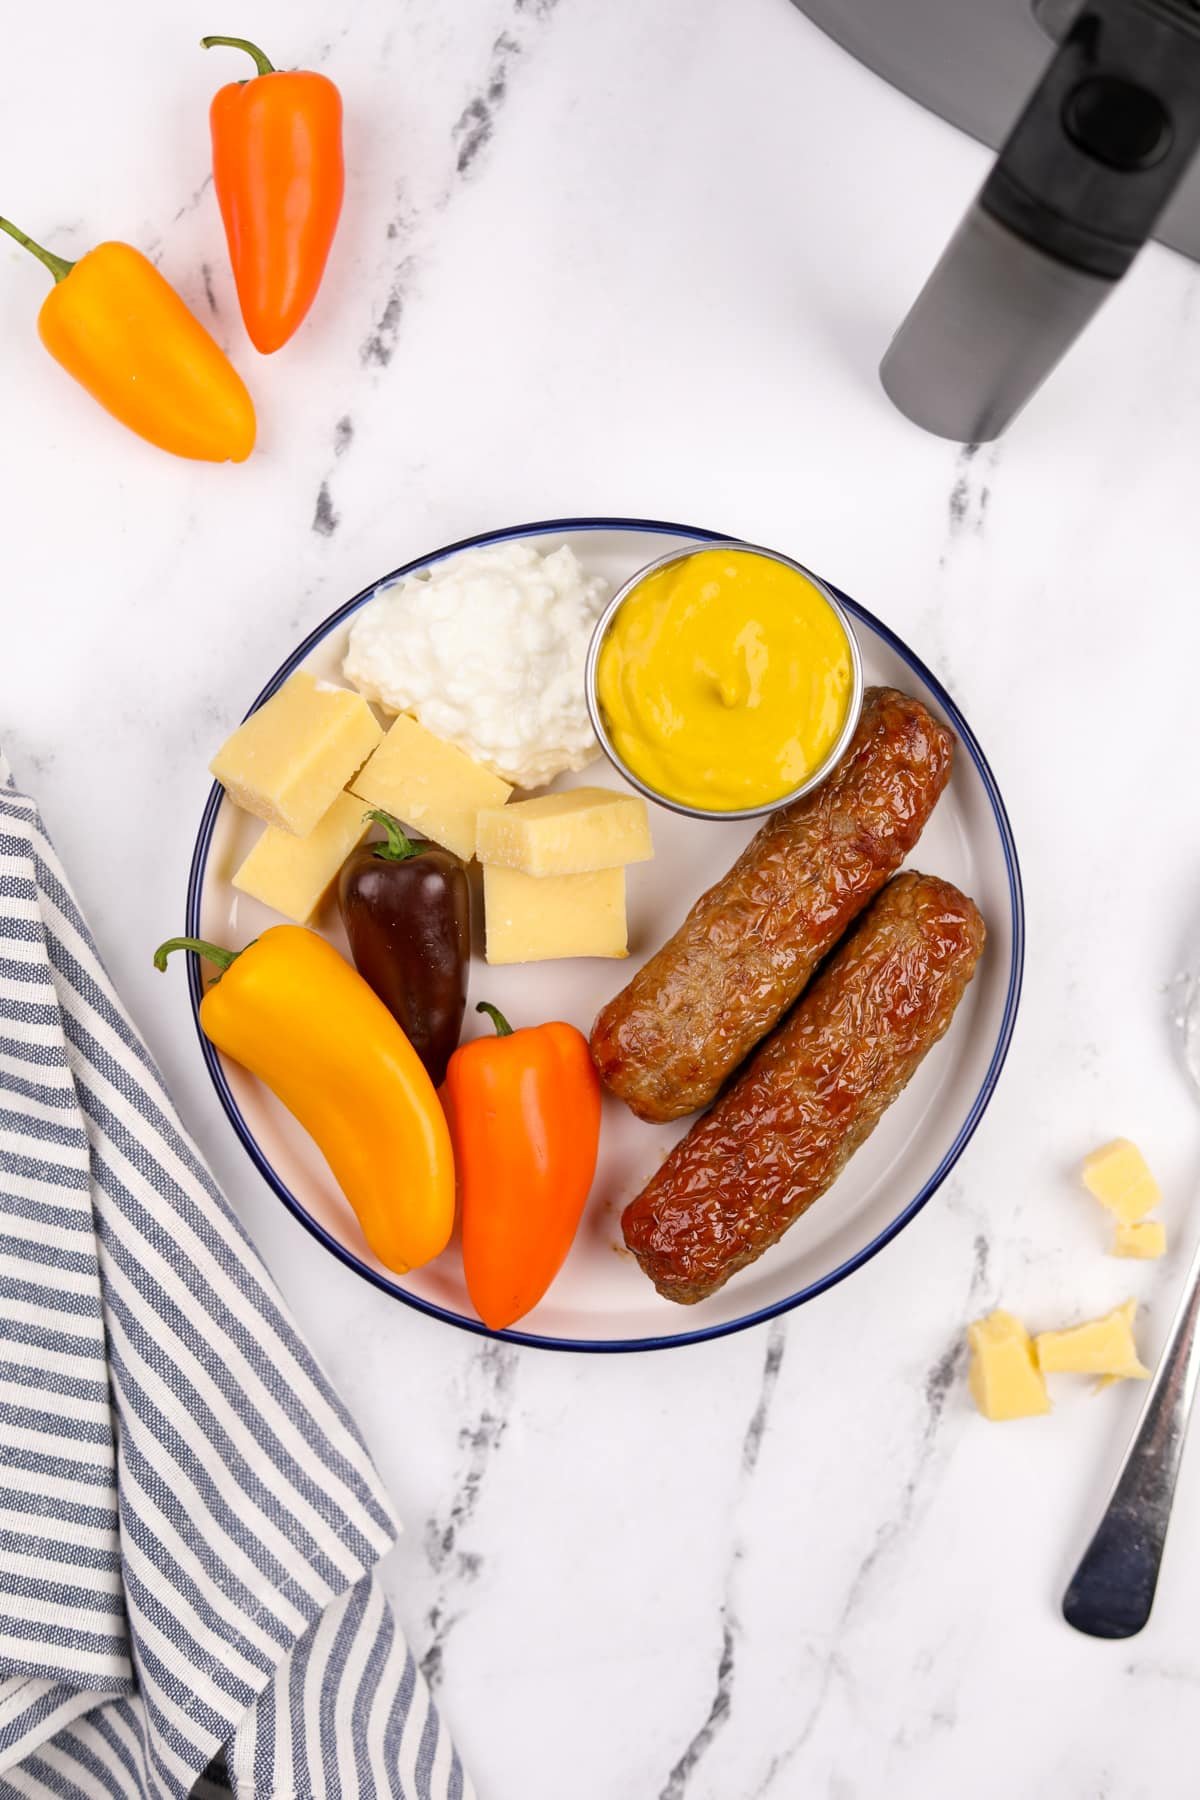 A plate with veggies, cottage cheese, mustard, and chicken sausages.